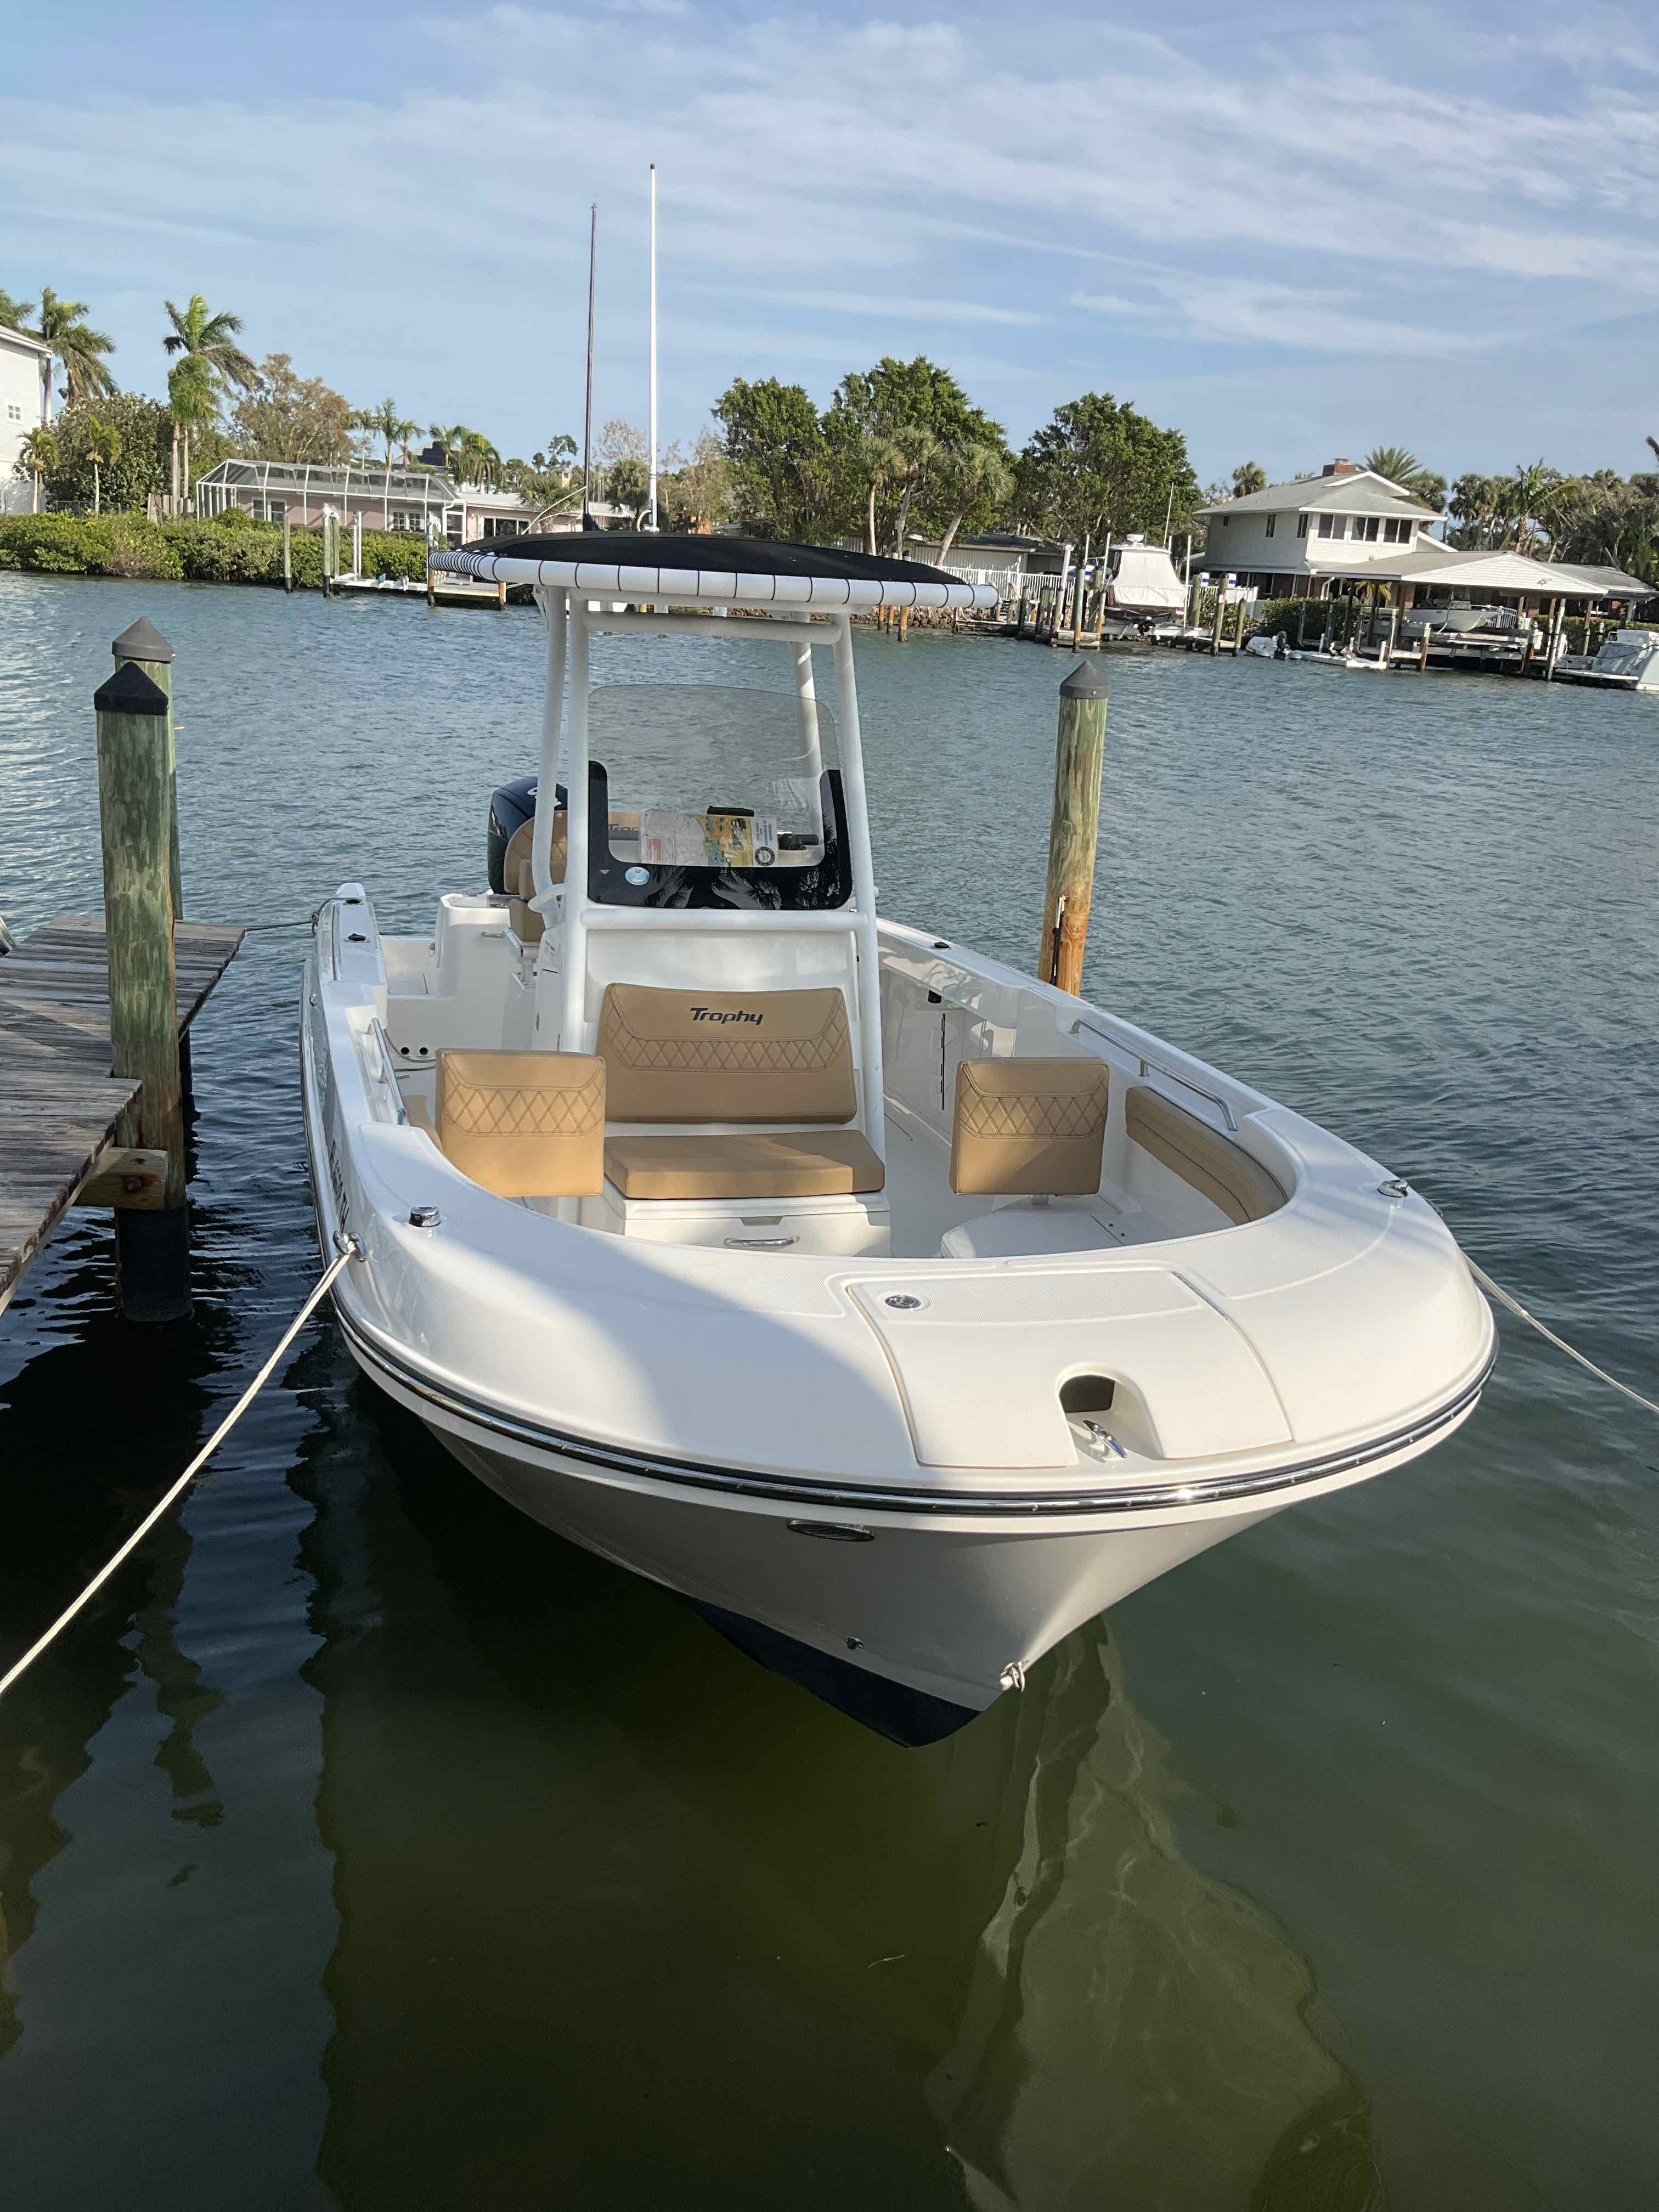 THE MOVEMENT (24FT Offshore Bayliner Trophy Center Console - 150 HP~Fishing)